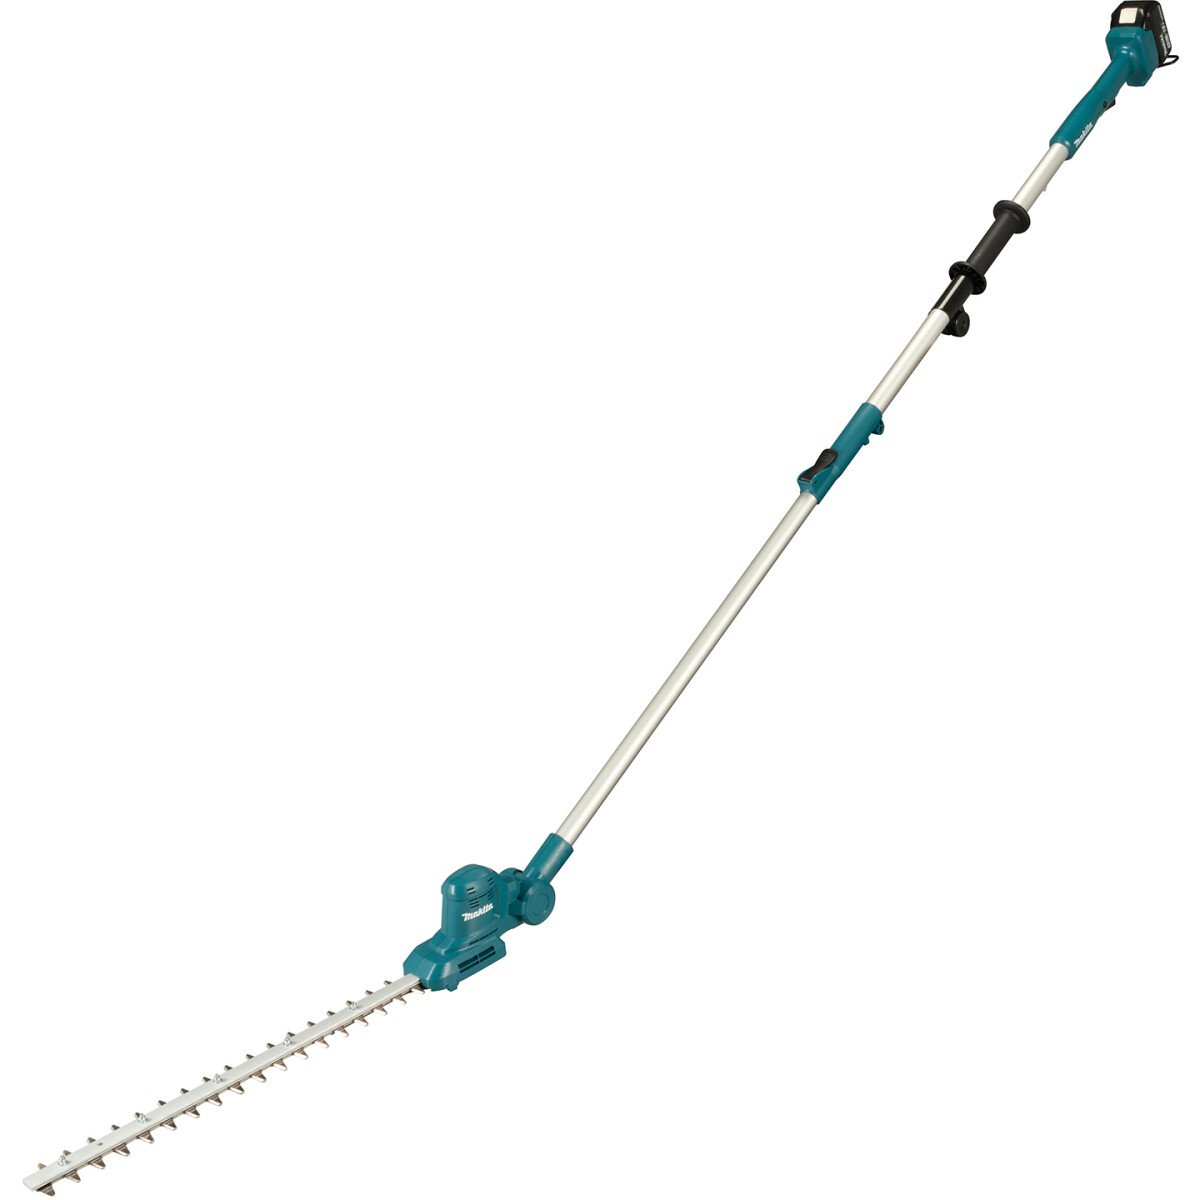 Makita DUN461WRT 18V 46cm Pole Hedge Trimmer 46cm with 1x 5.0Ah Battery & Charger